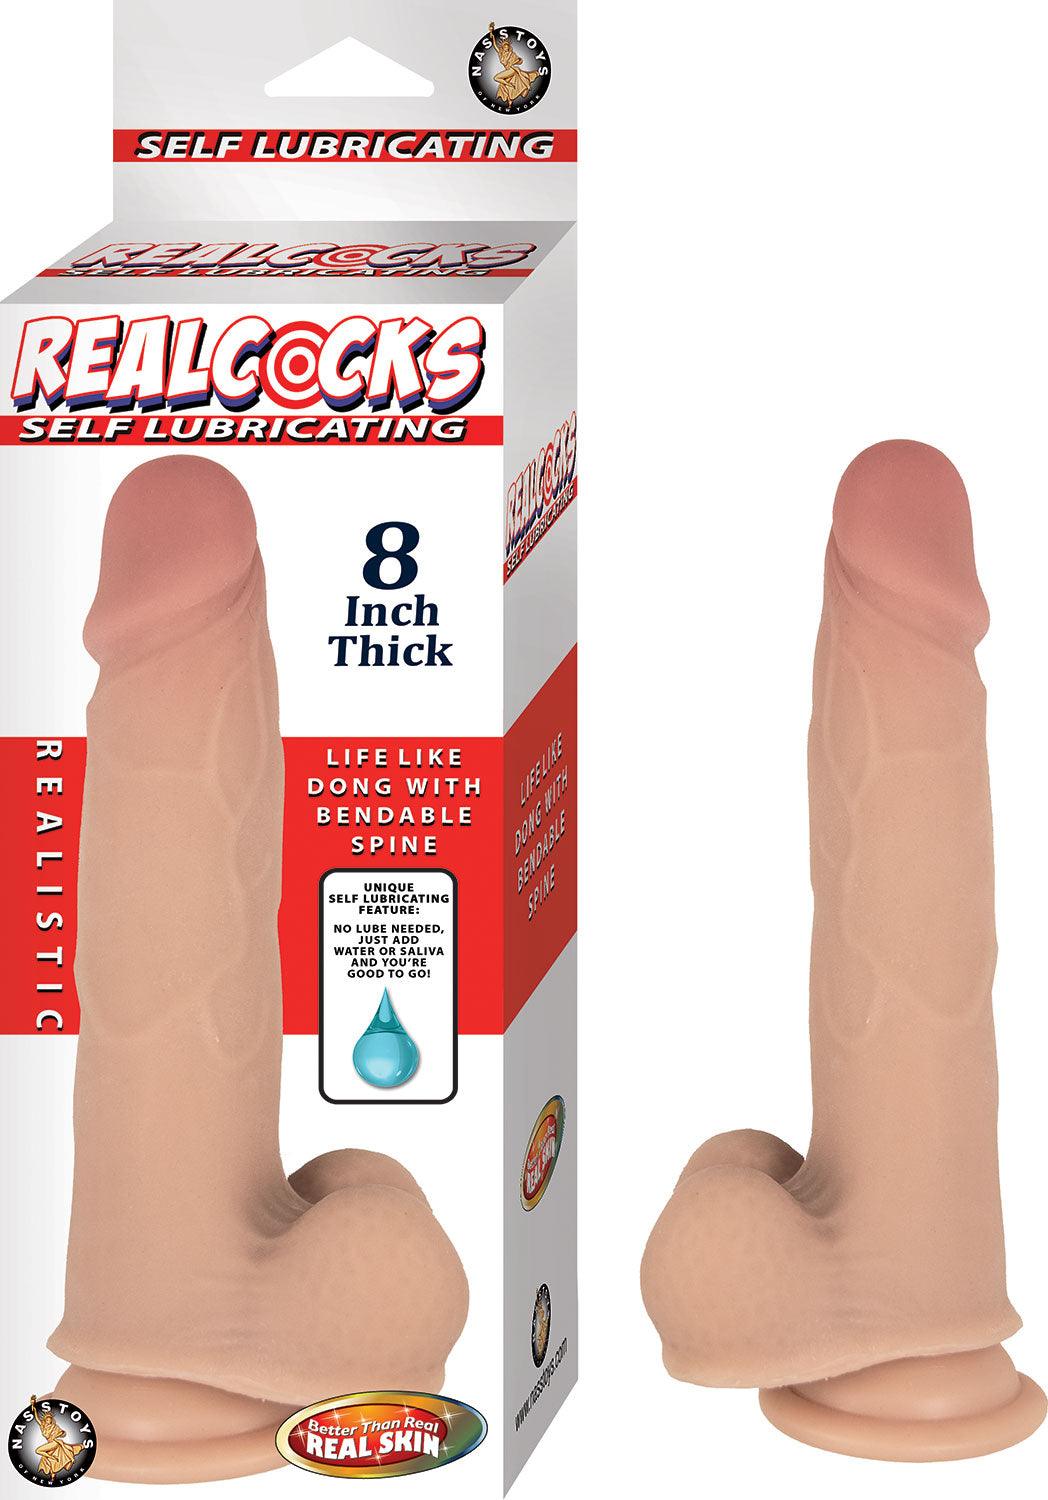 Realcocks Self Lubricating 8 Inch Thick - White - My Sex Toy Hub